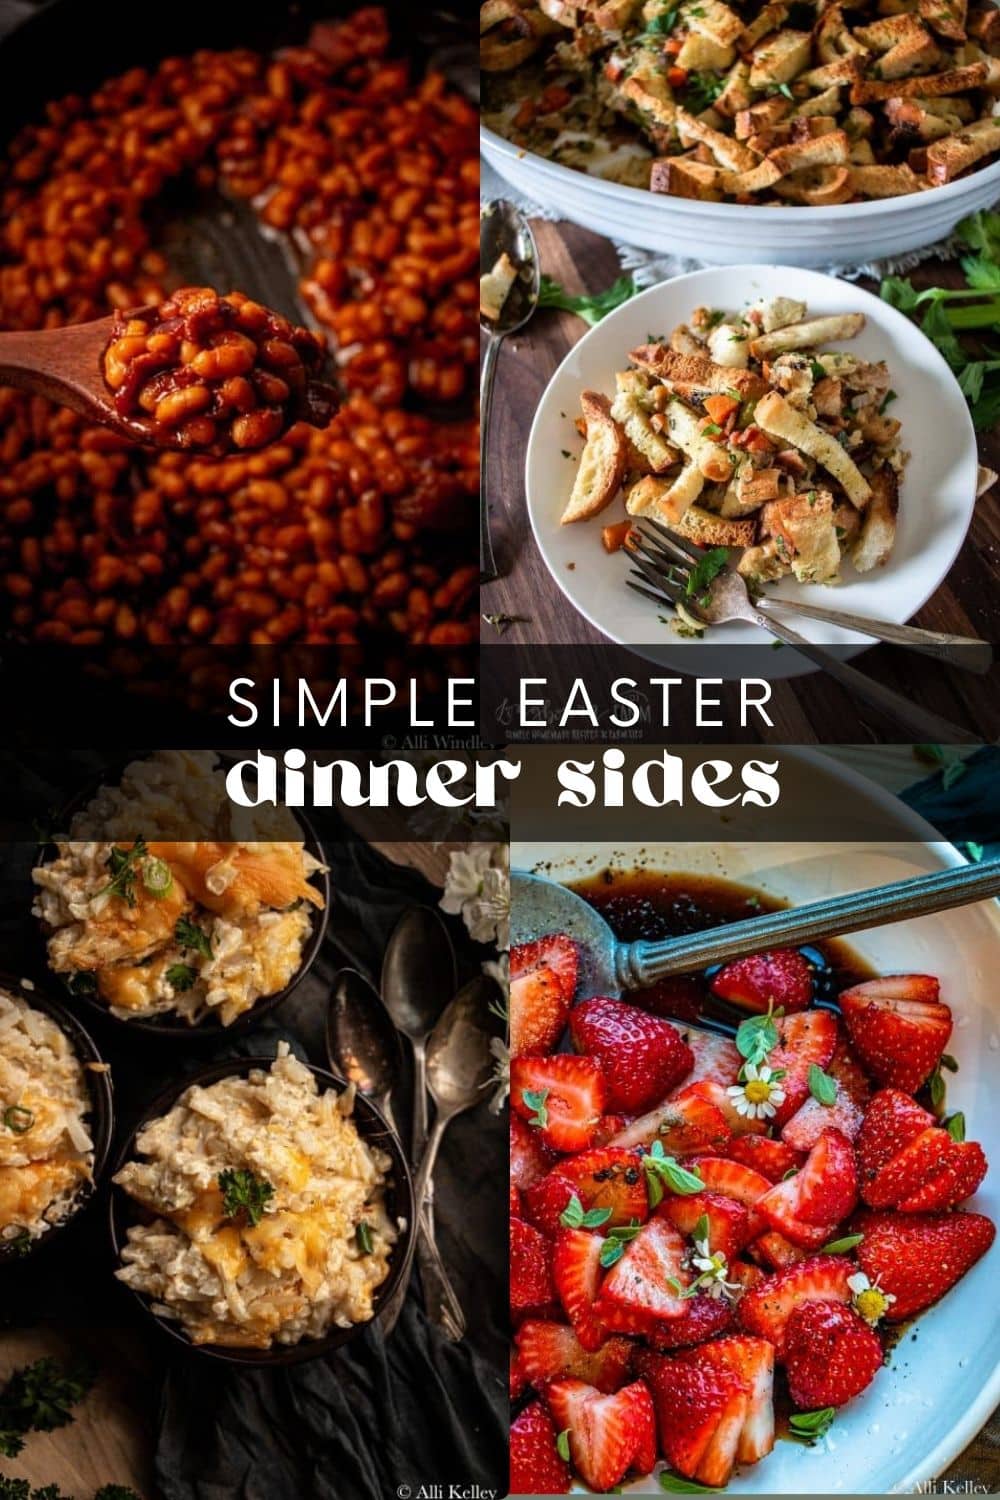 The ham or lamb might be the stars of your Easter dinner, but let's be serious: the sides are where it's at! From the best-ever Brussels sprouts to make-ahead pasta salads, these Easter side dishes will make this year's feast one to remember.